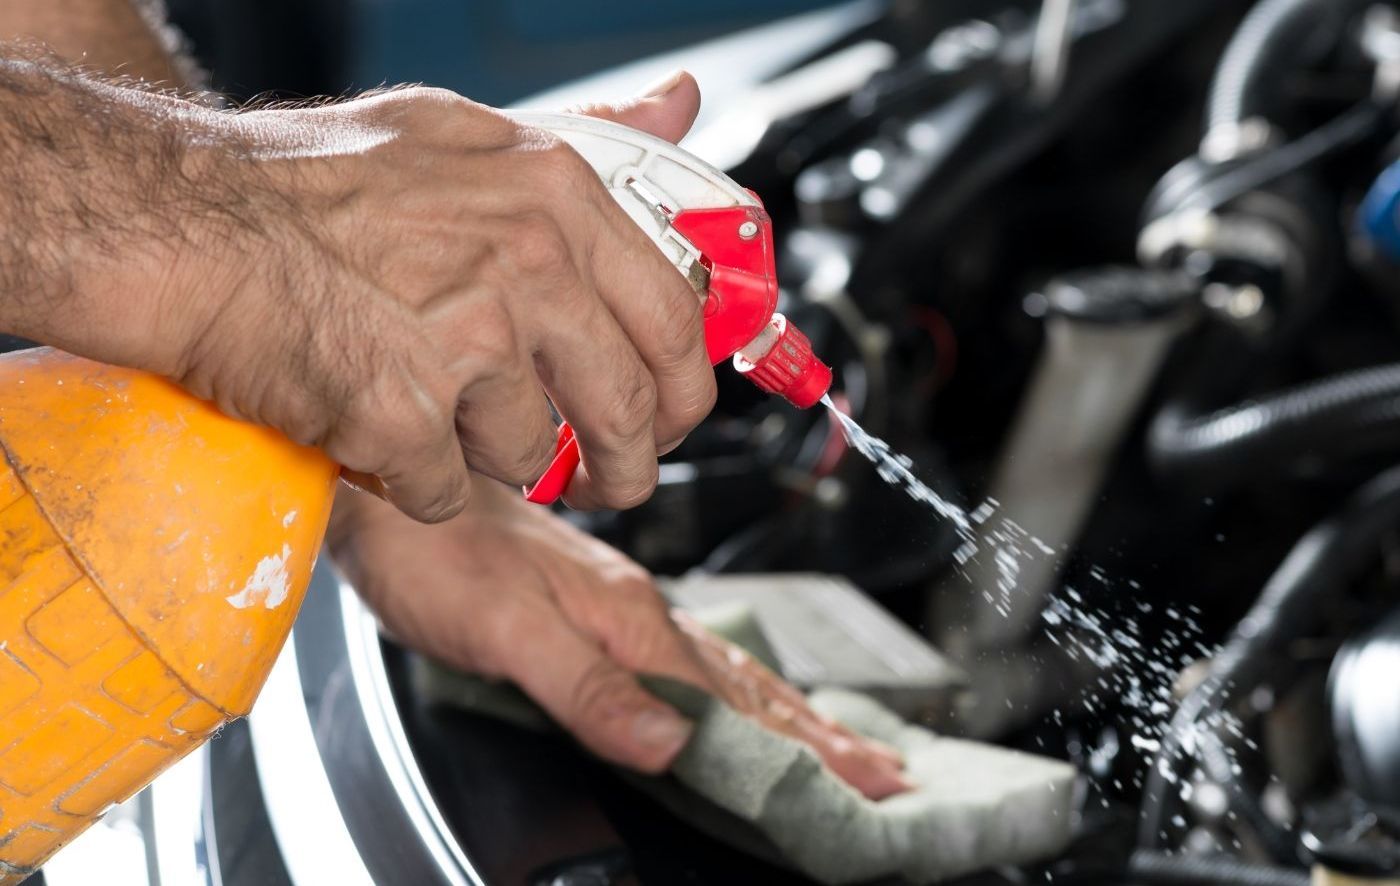 man spraying degreaser to prep an engine for a detail